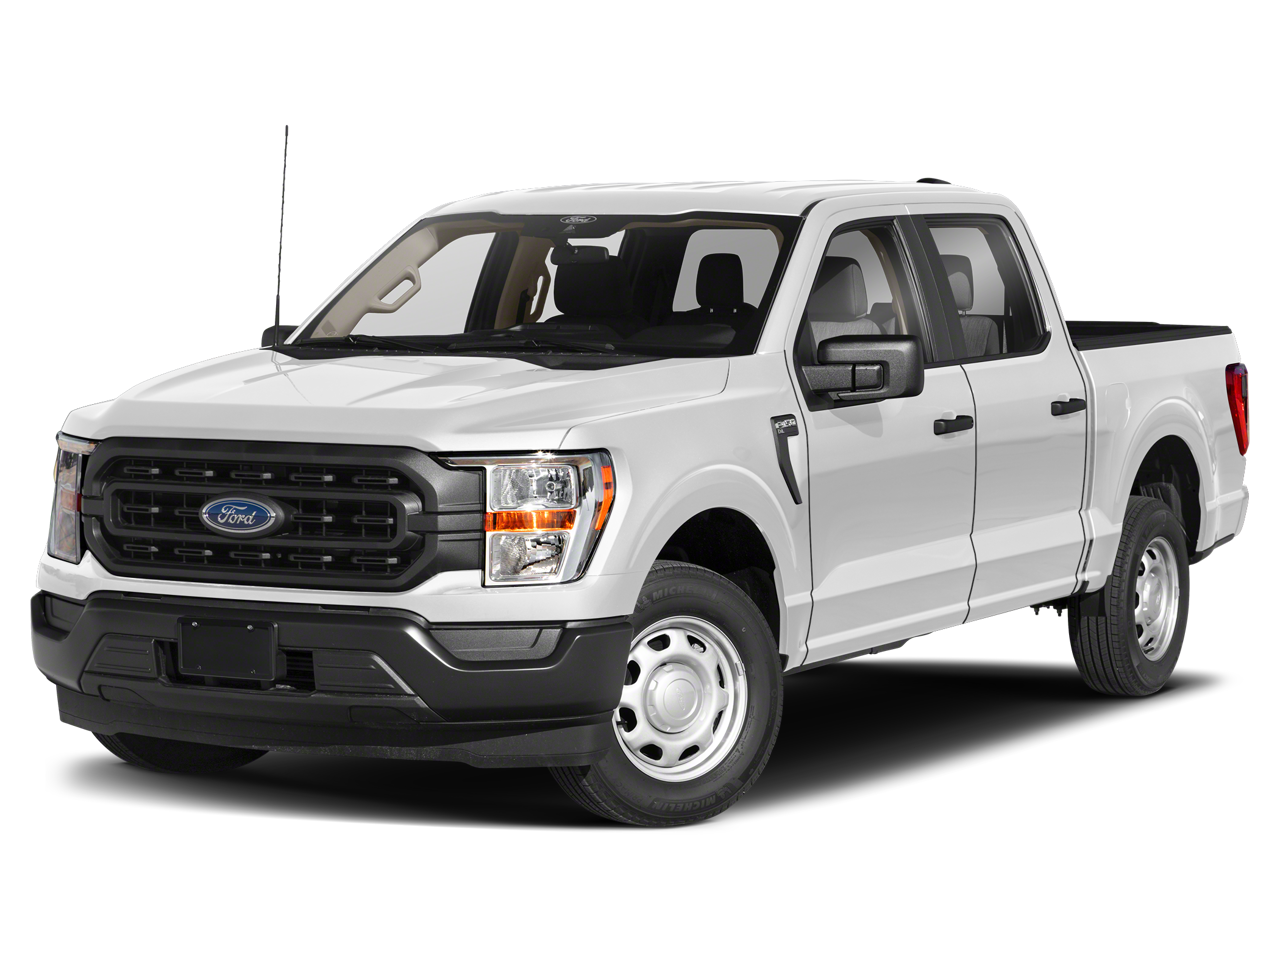 2023 Ford F-150 XL in Anderson, SC | Greenville Ford F-150 | Anderson ...